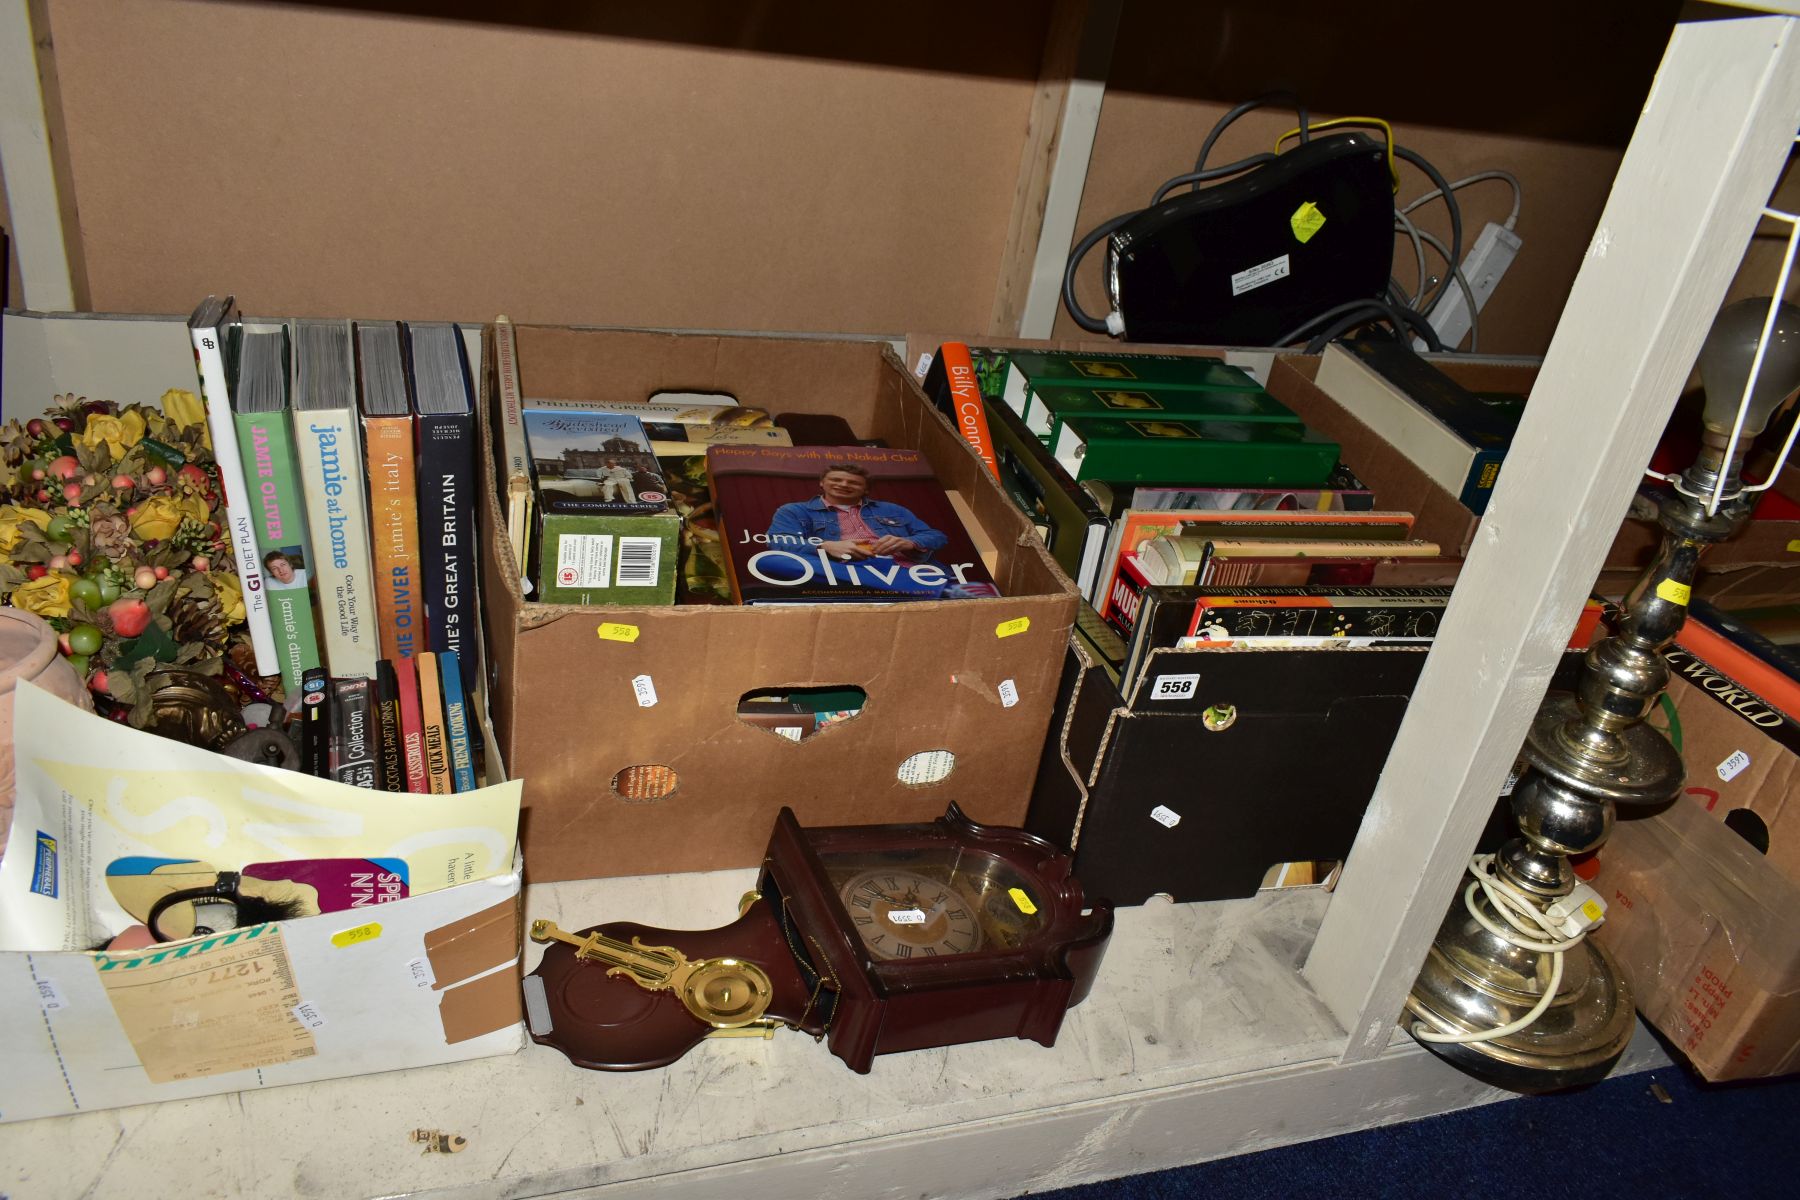 BOOKS, DVD'S AND GAMES, five boxes containing a miscellaneous assortment of books (encyclopedic,